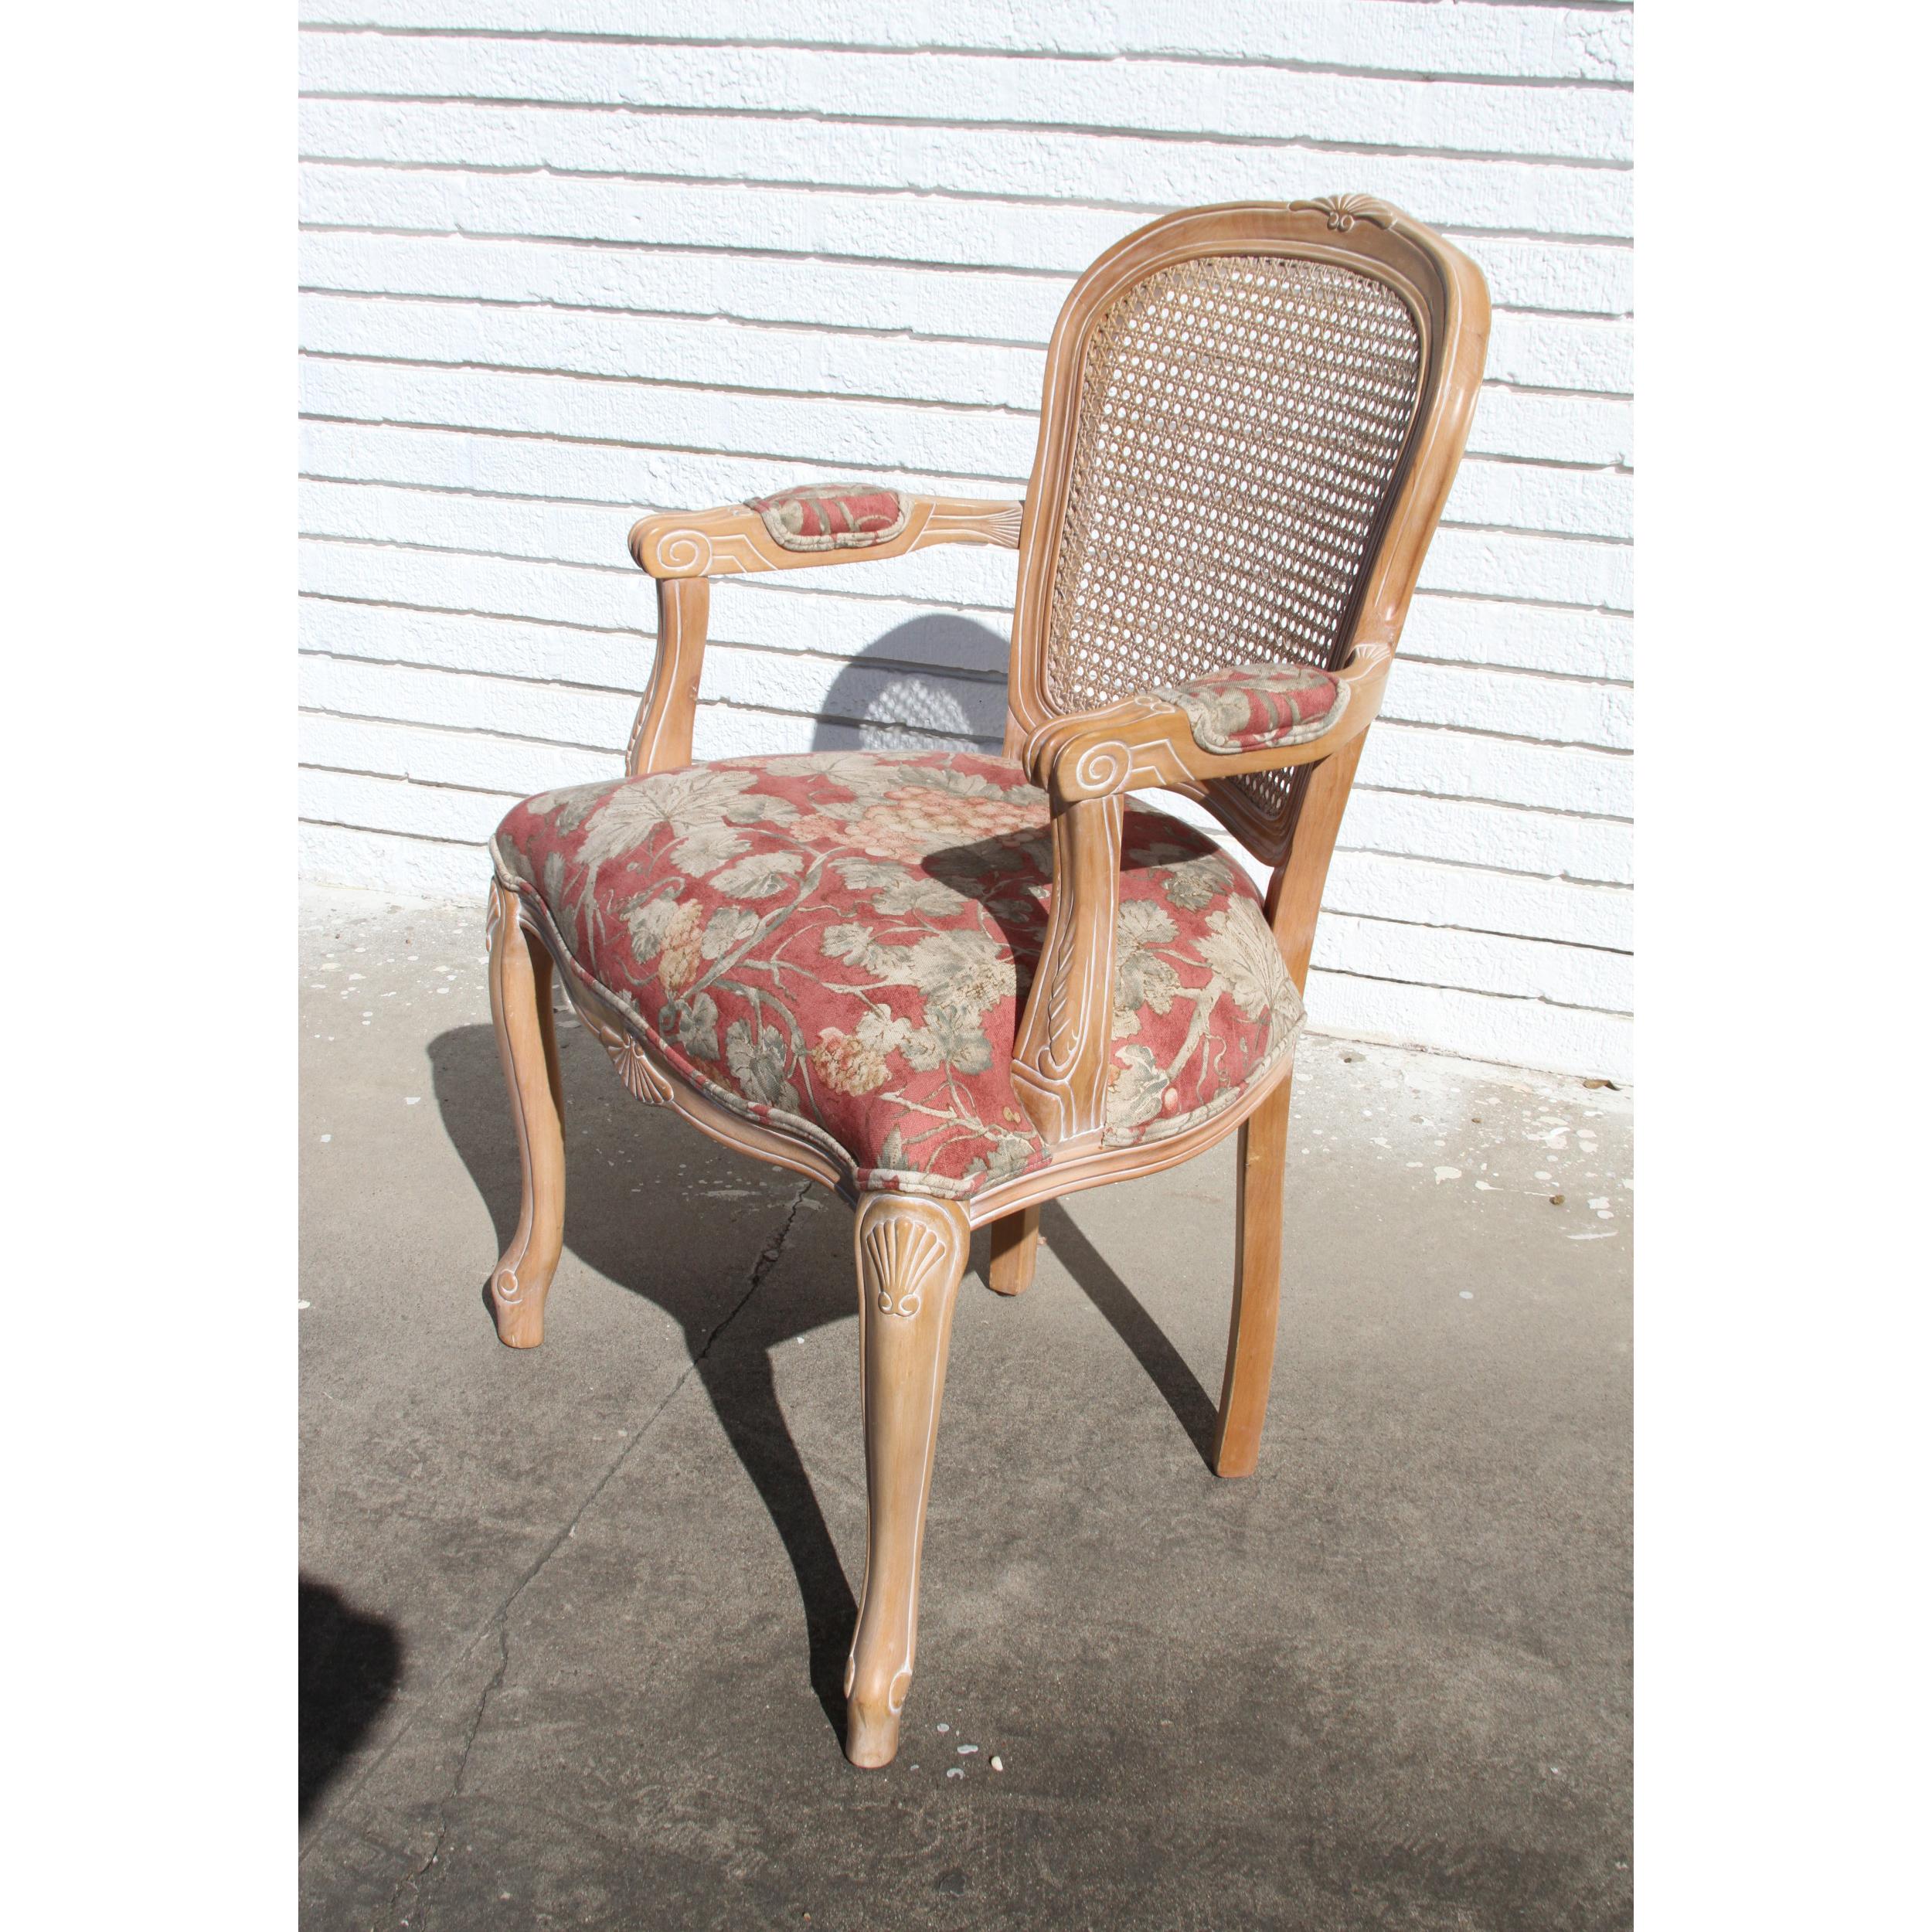 Beautiful French Style floral side chair-cane back , floral print fabric in muted tones, delicate carved and accent light wood .